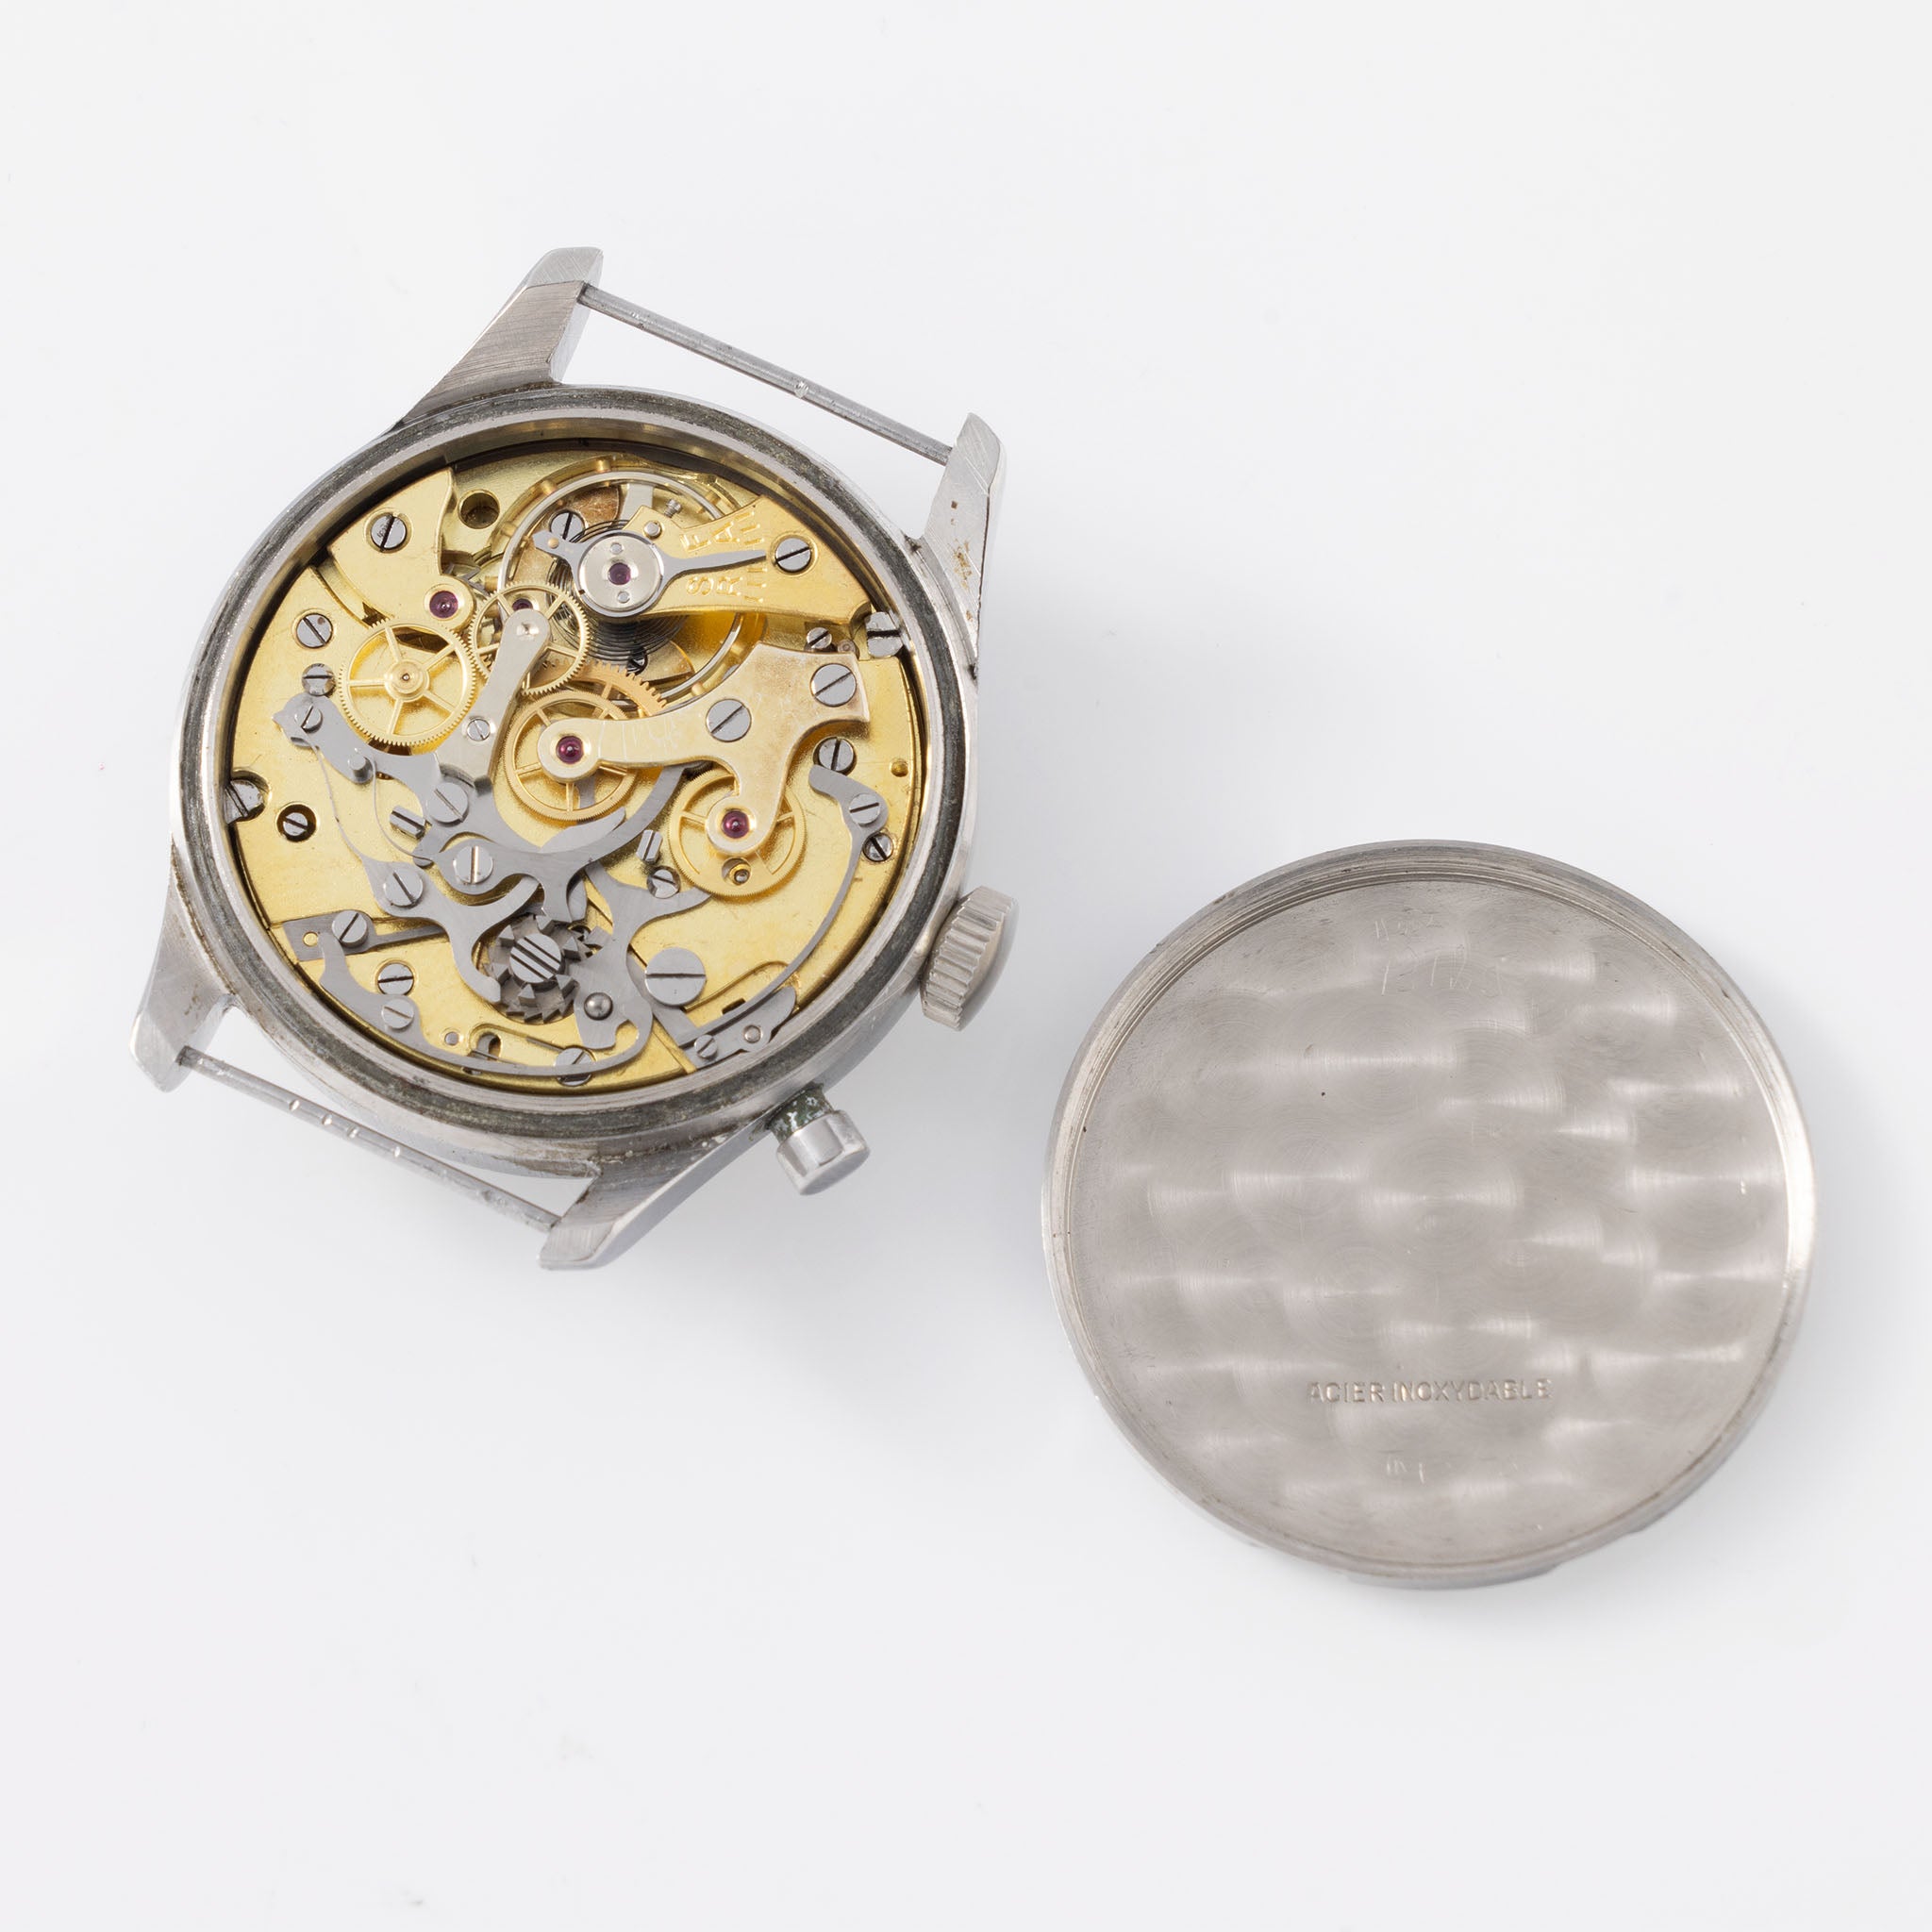 Lemania Monopusher Chronograph Issued to British Armed Forces